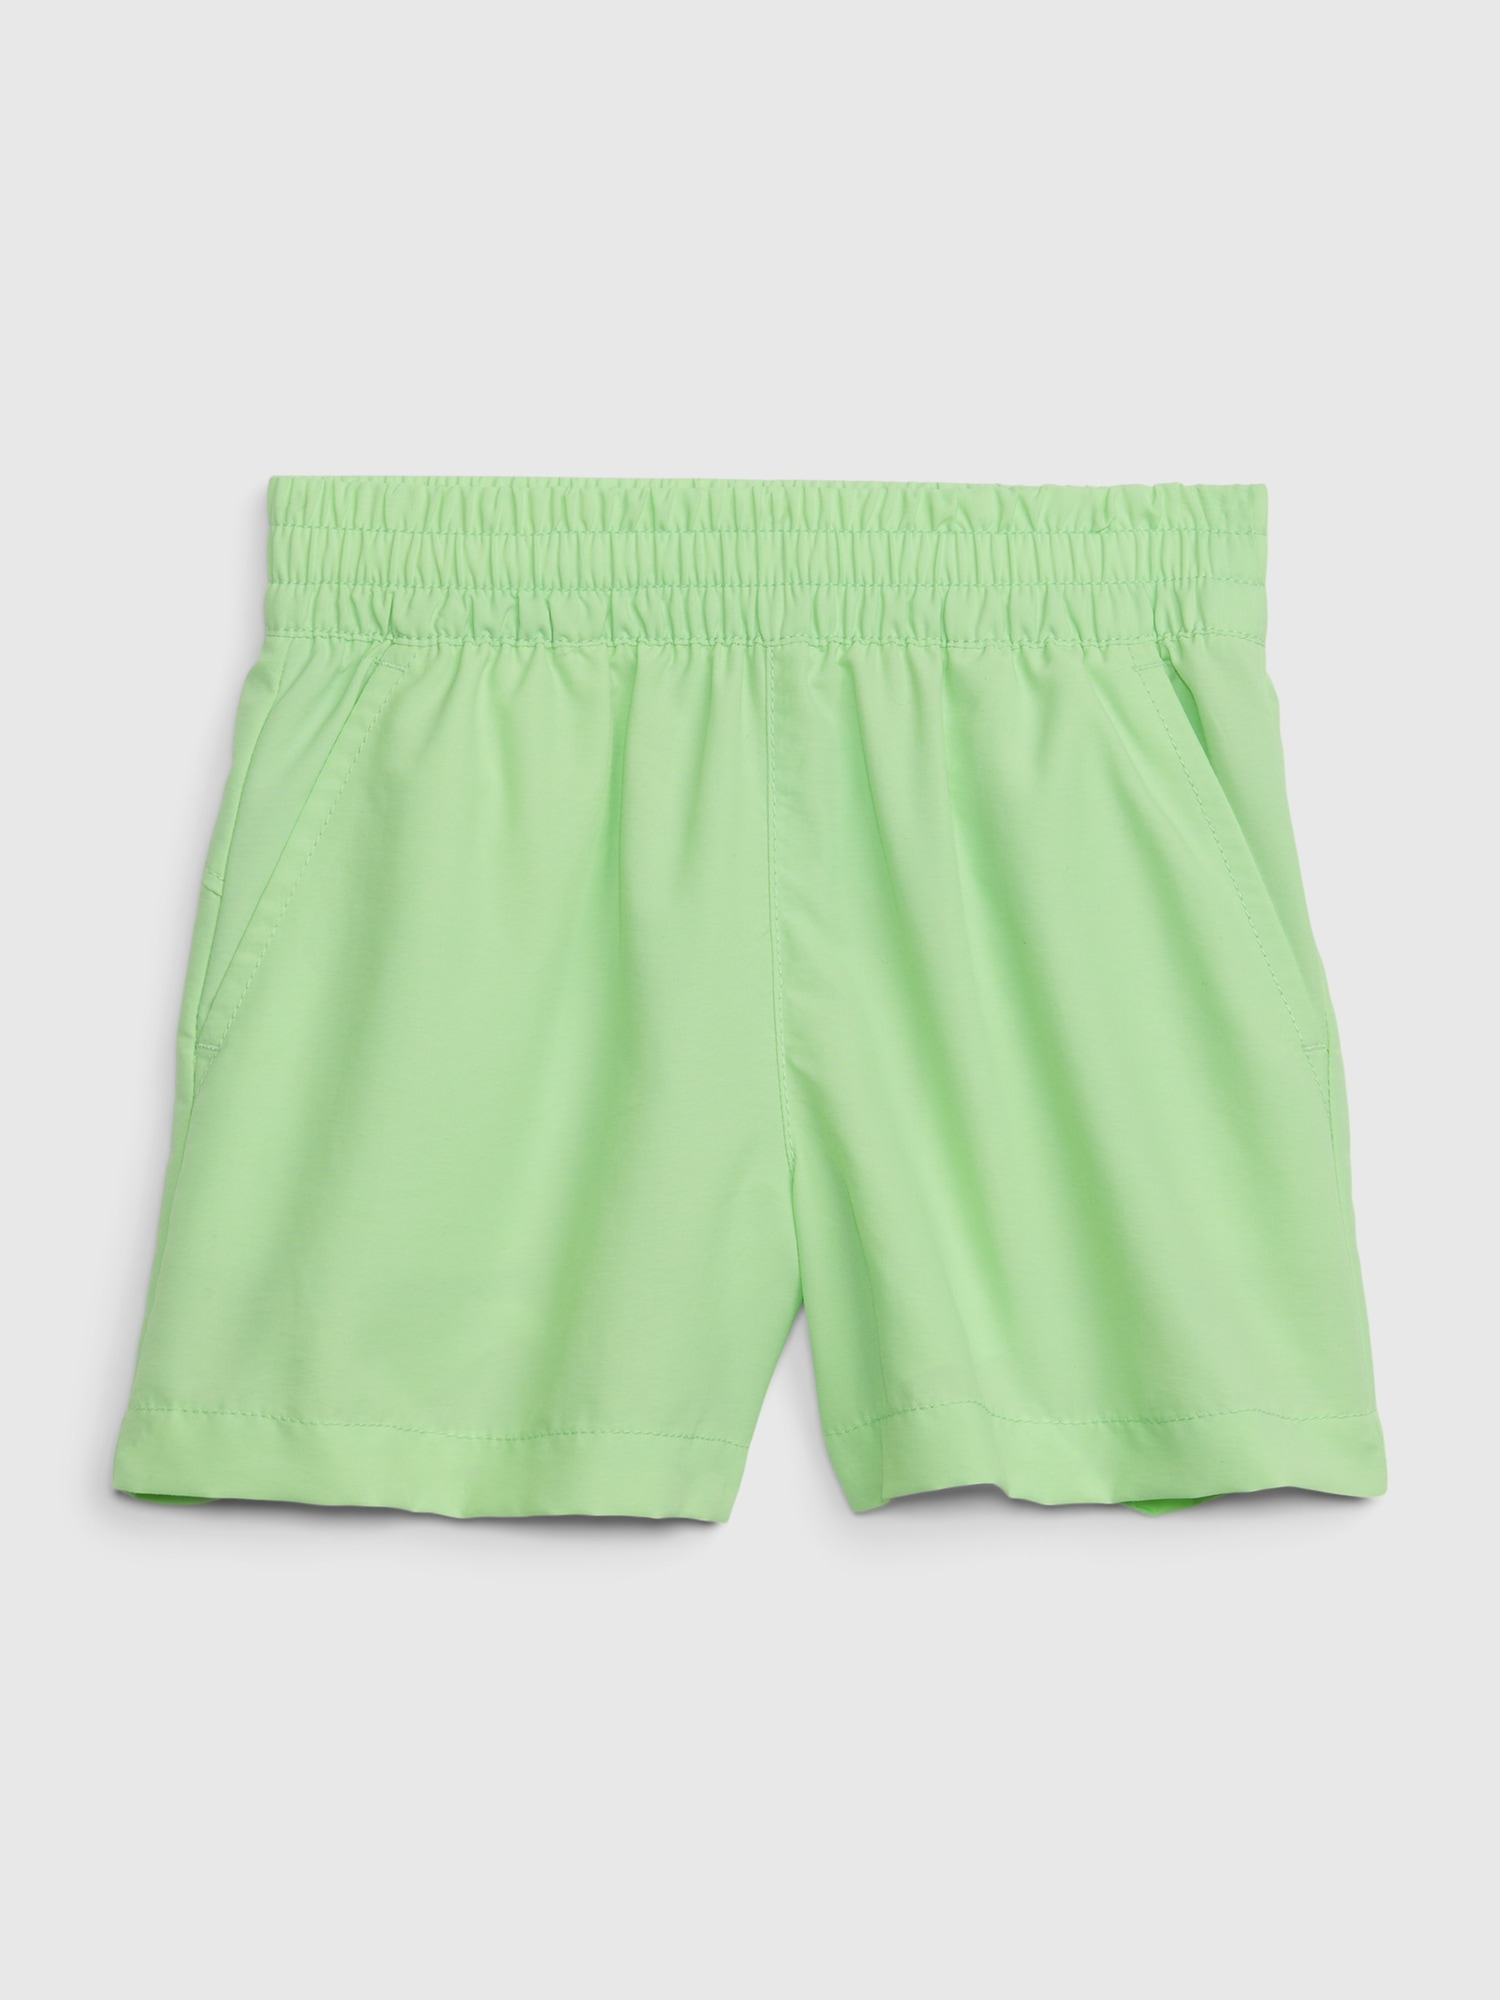 Gap Fit Toddler Fit Tech Pull-On Shorts green. 1